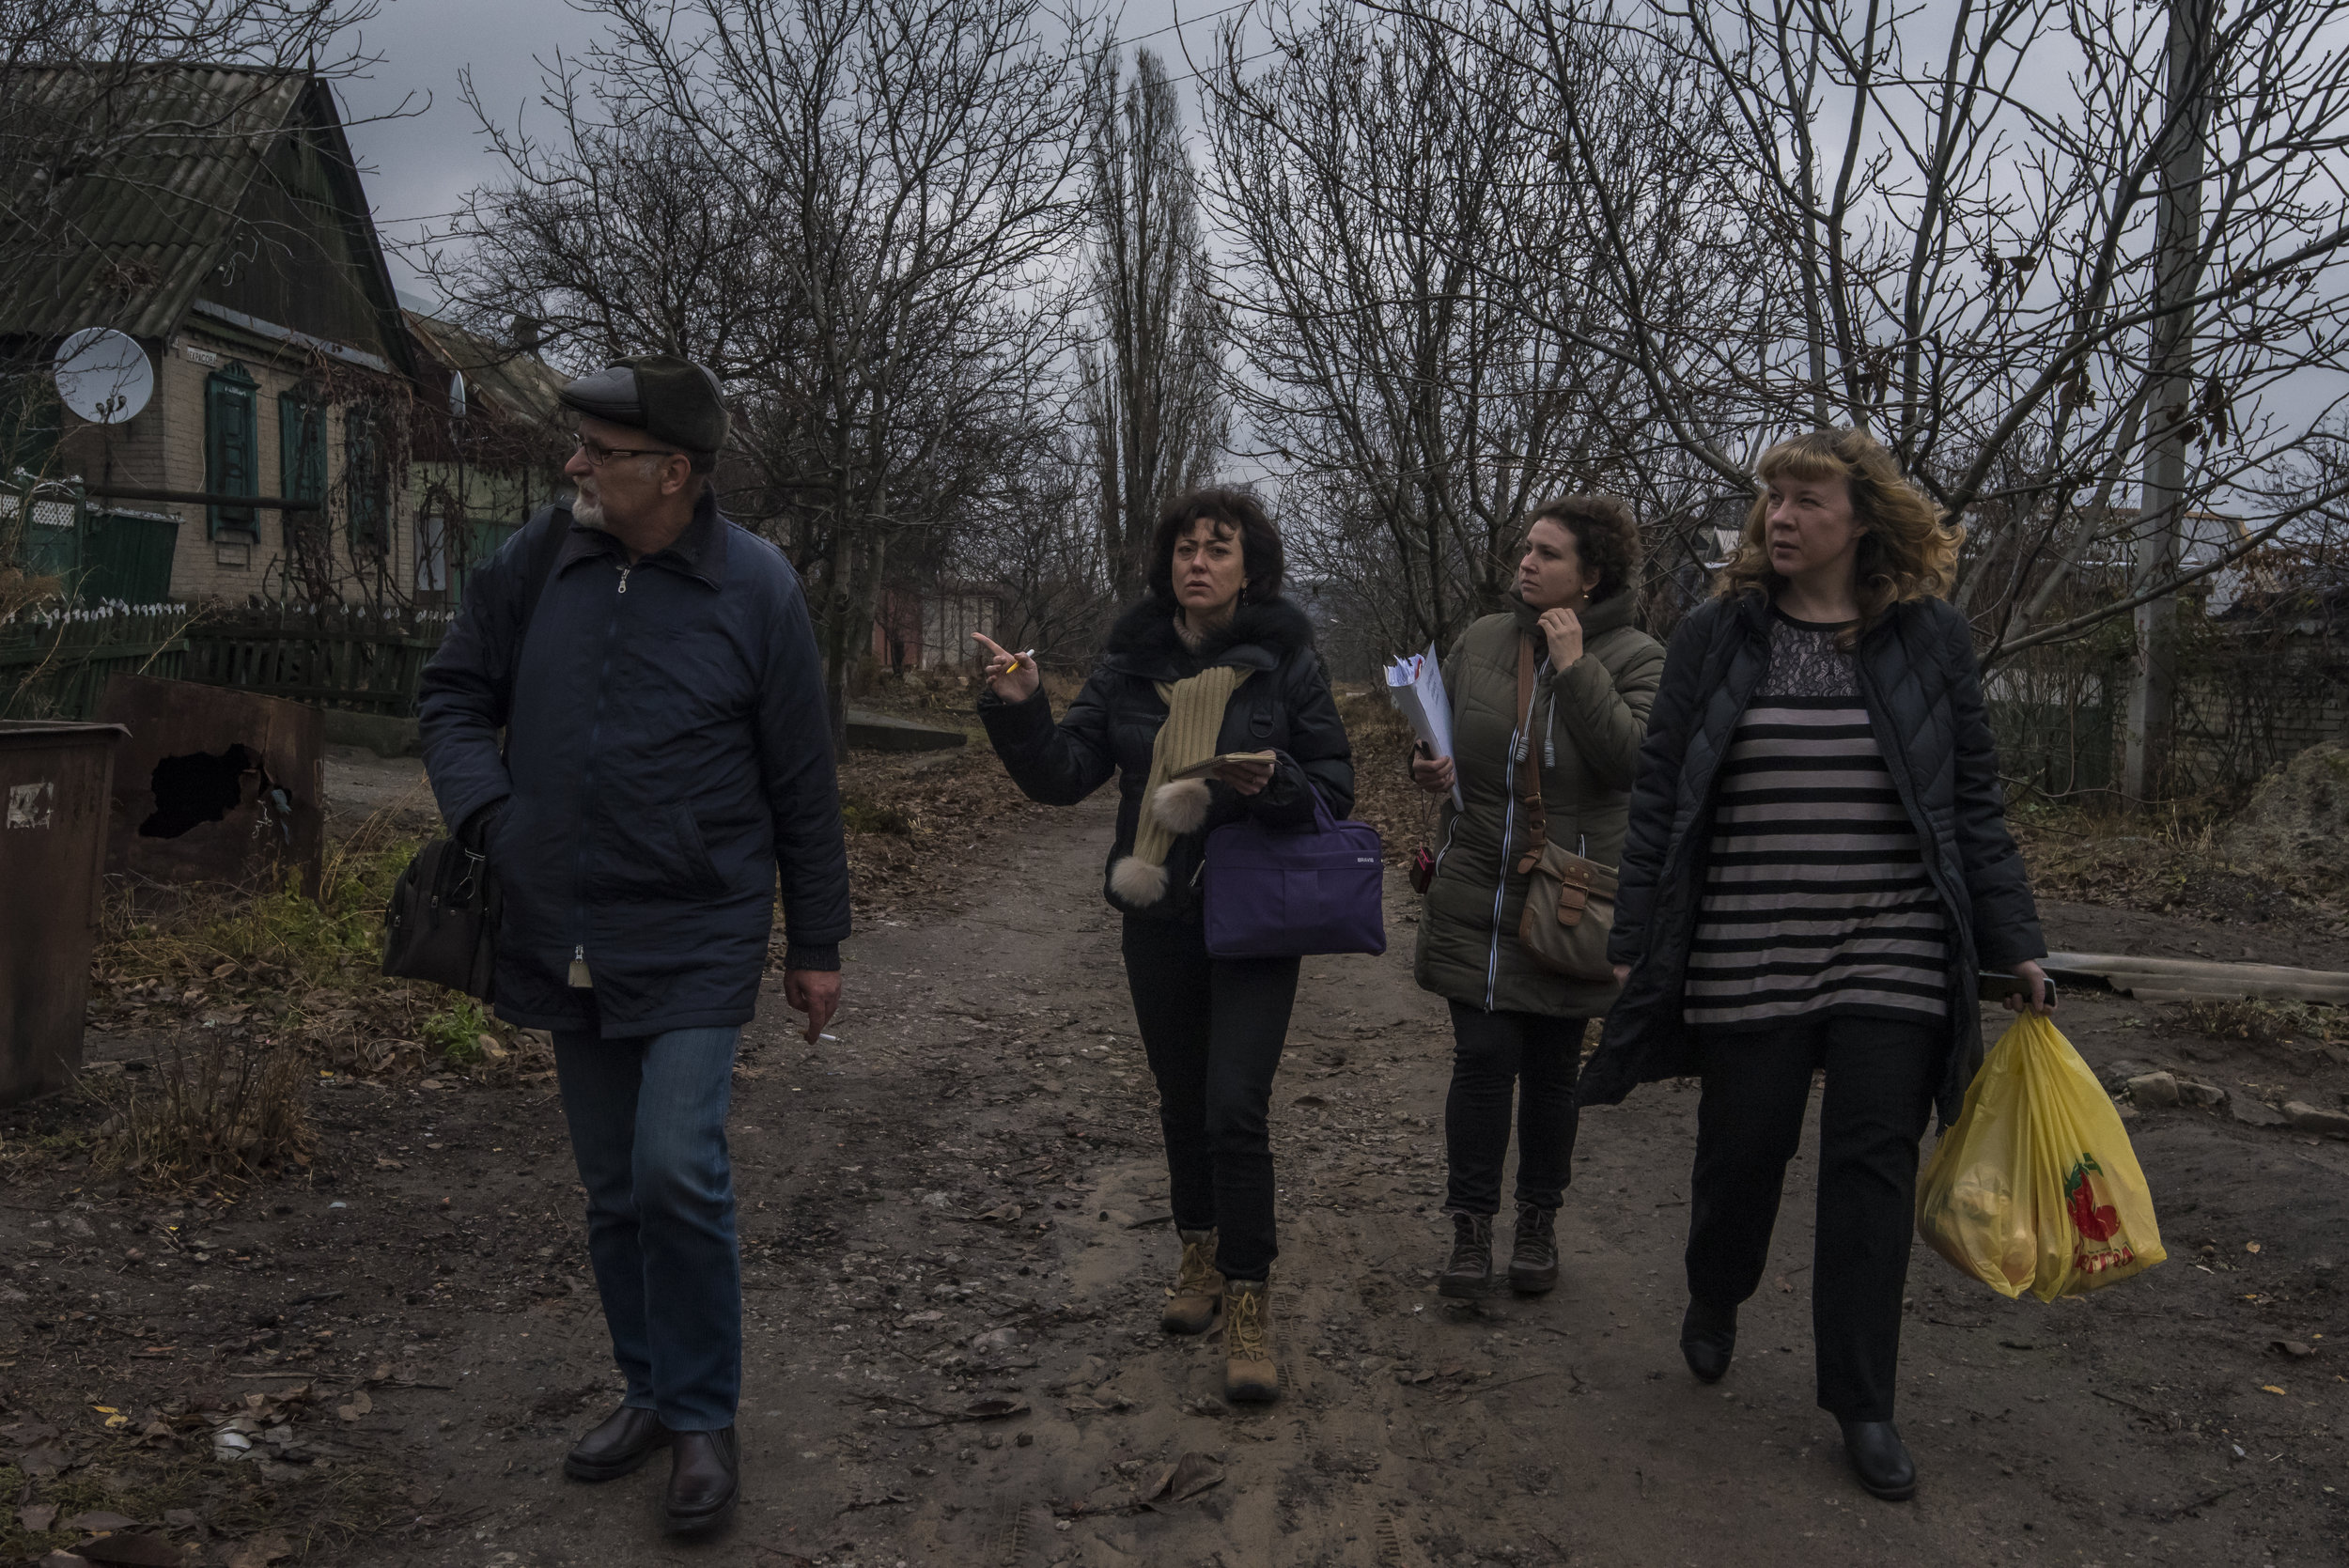  Kyiv-based voulnteers Ksenia Ponomarjova, Irina Shopina, and Veronika Korol look for the home of an elderly woman with local doctor Dr. Sergei Yakovlevich in Avdiivka, Ukraine. 